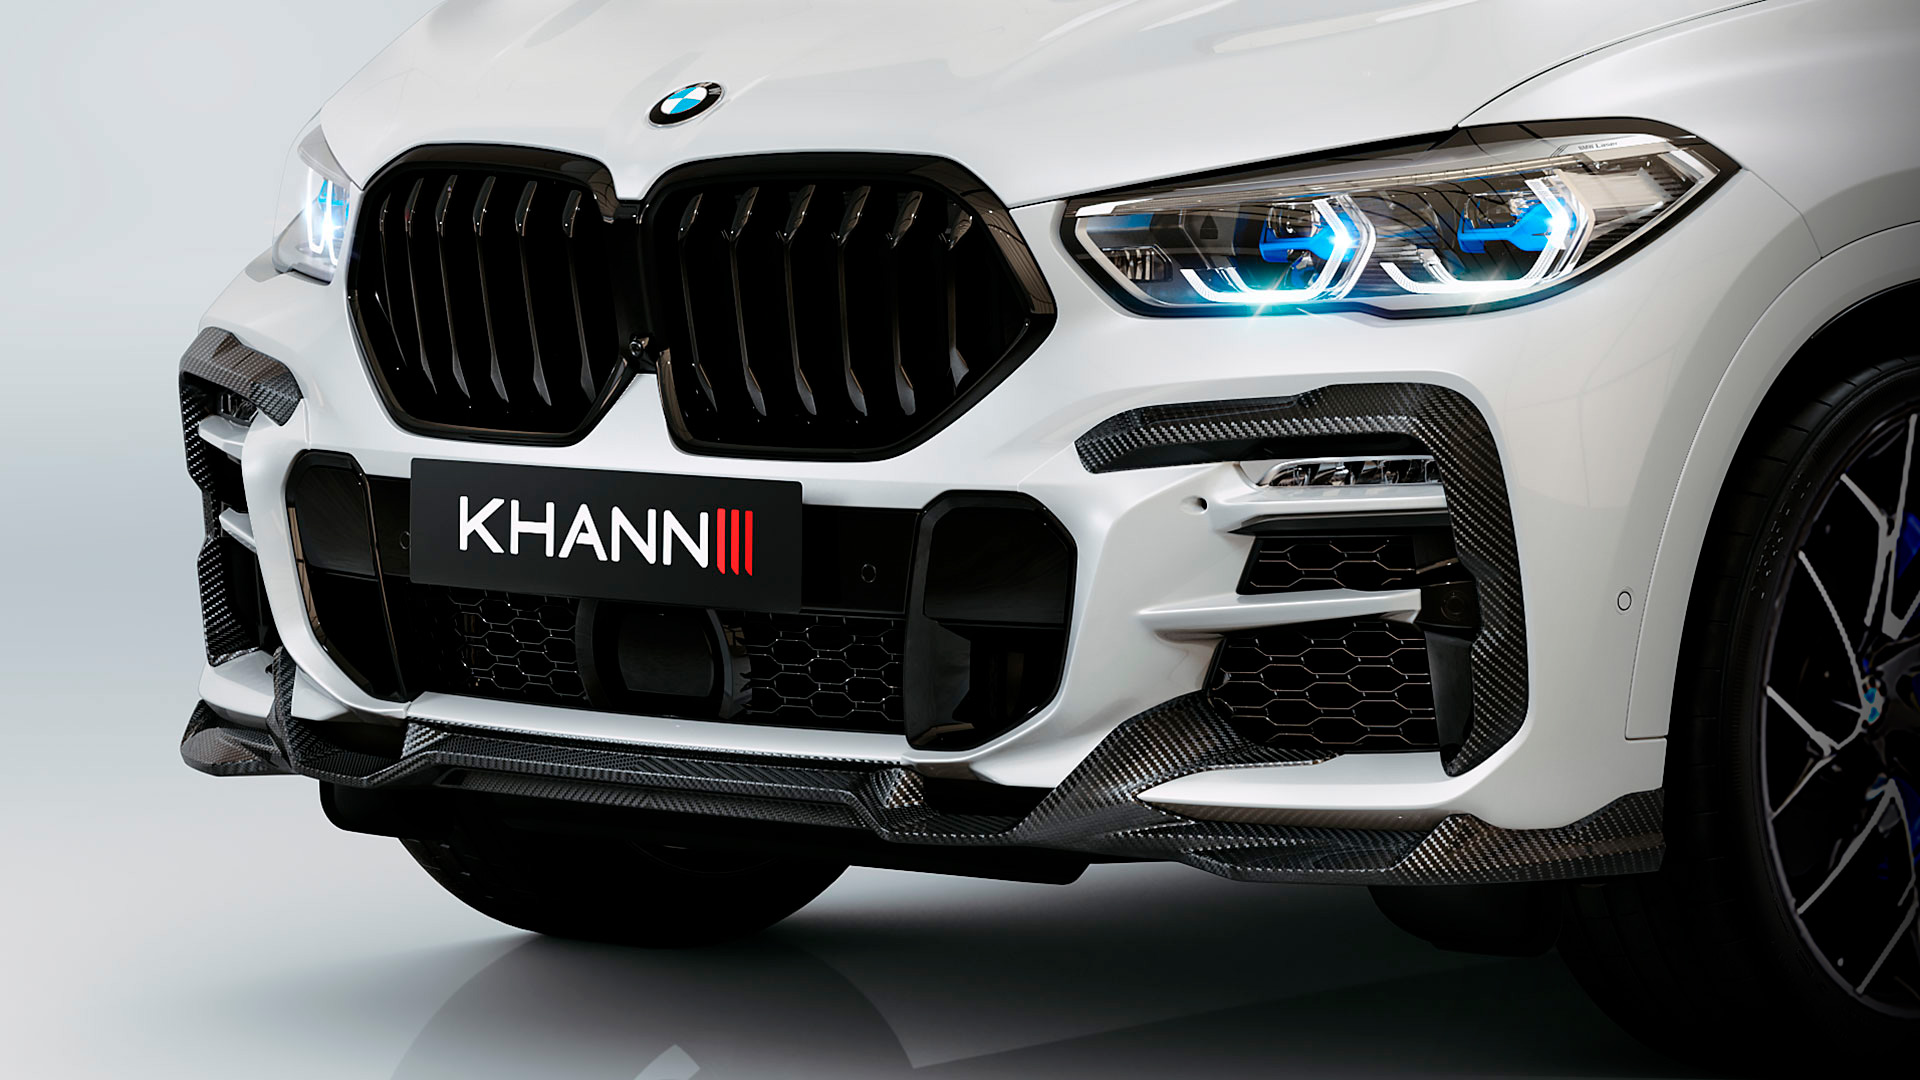 Check our price and buy Khann carbon fiber body kit set for BMW X6 G06!